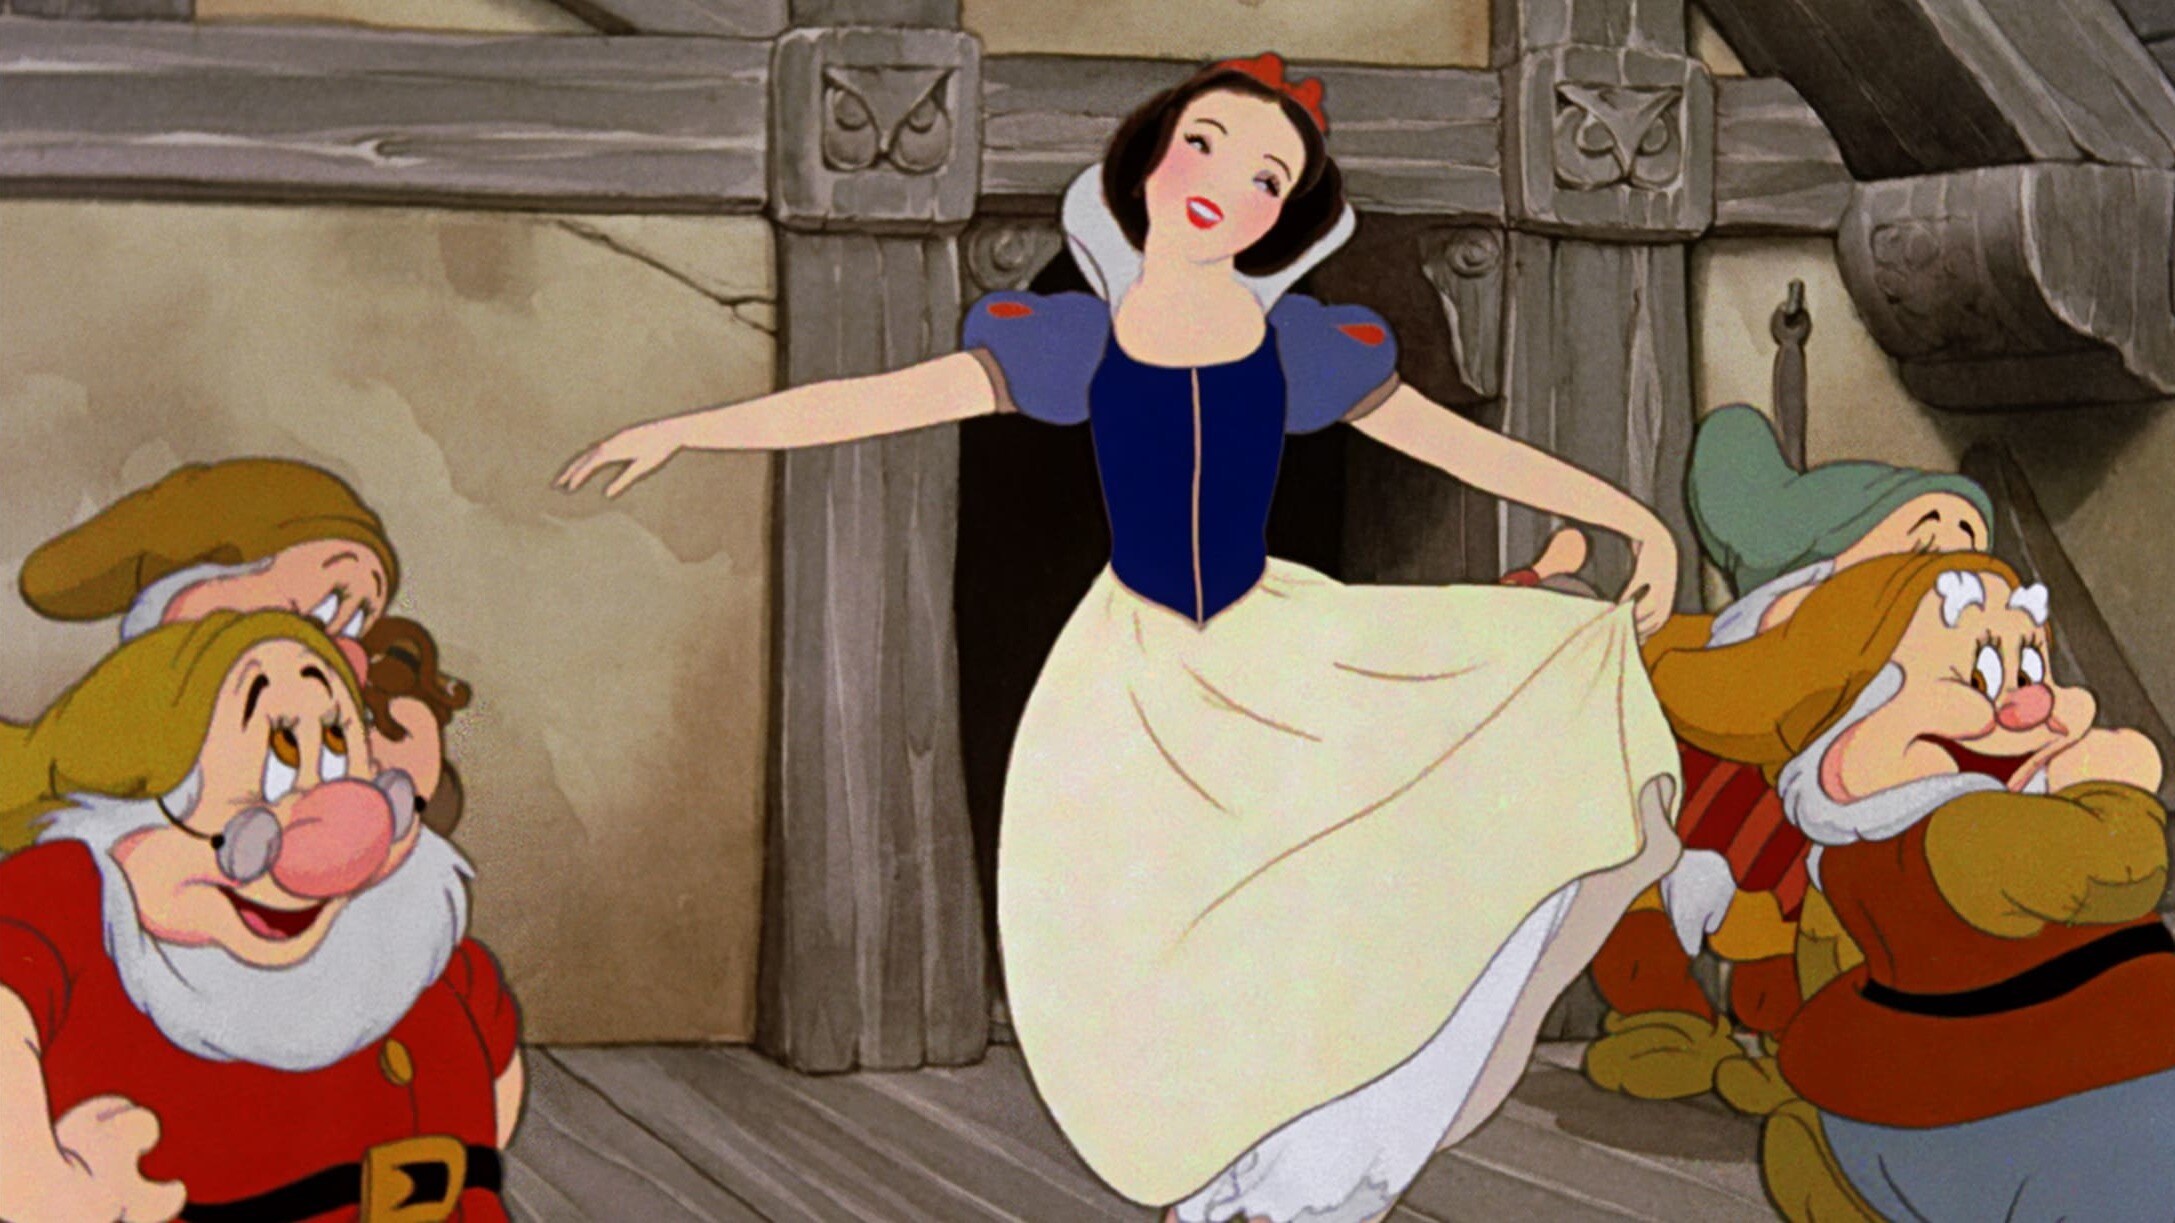 Snow White dancing with the Seven Dwarfs.